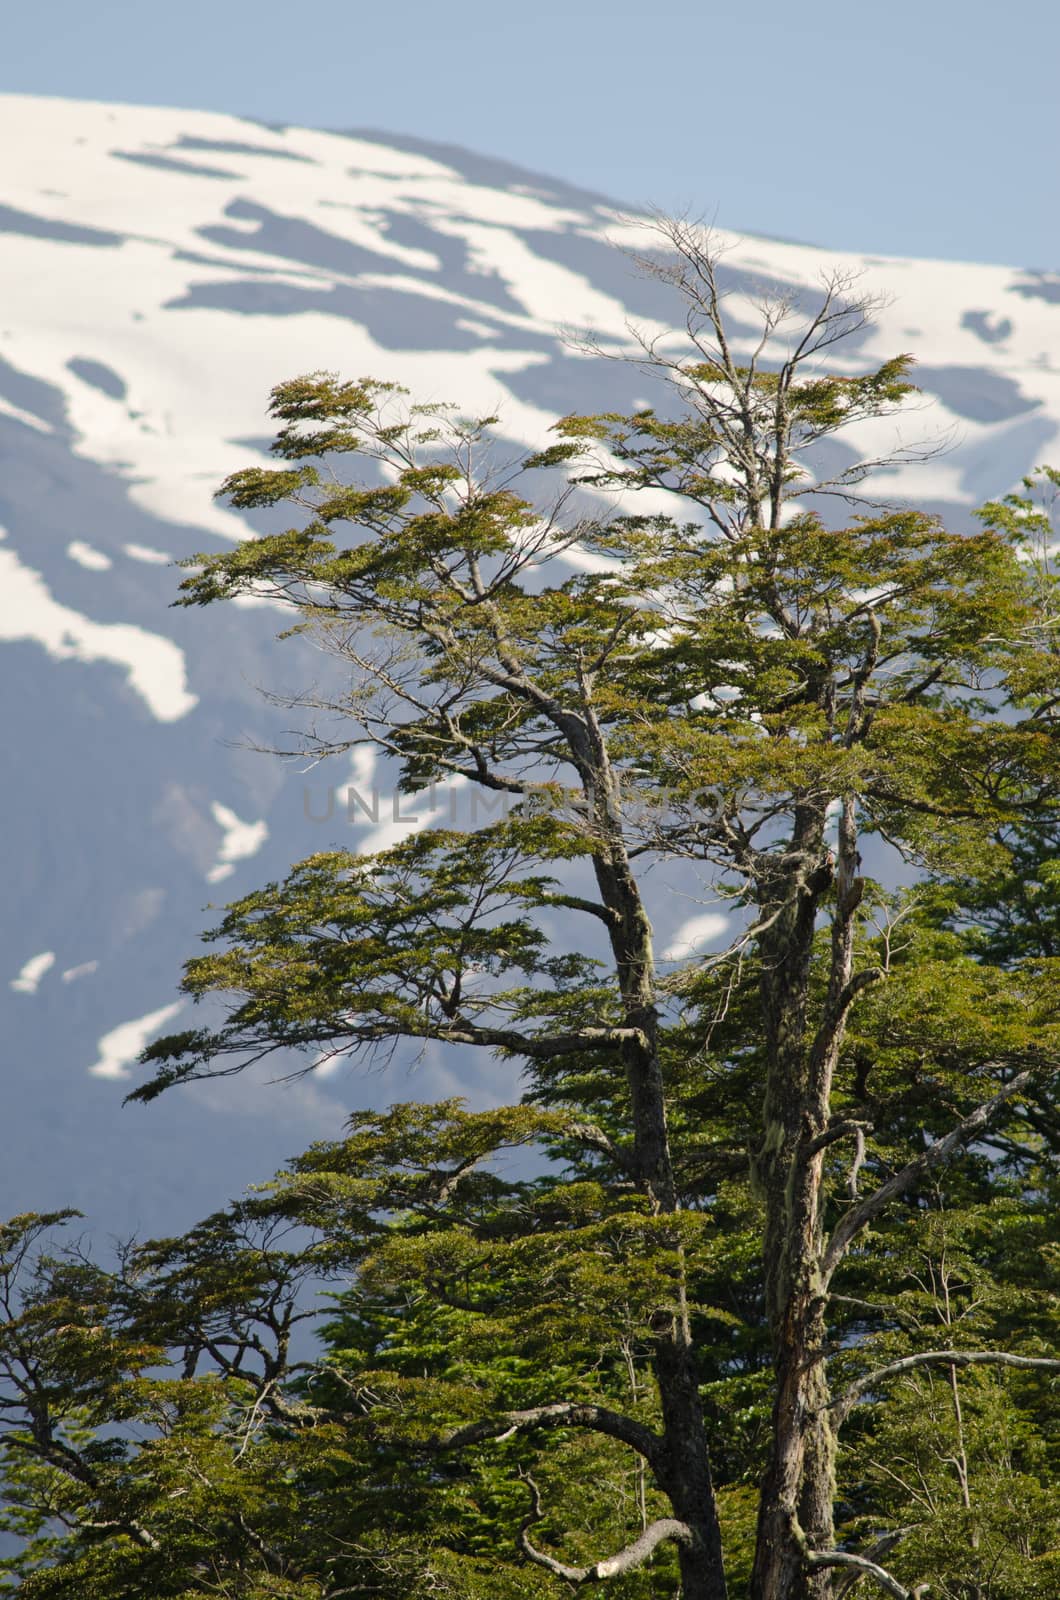 Dombey's beech Nothofagus dombeyi and Llaima volcano slope in the background. by VictorSuarez